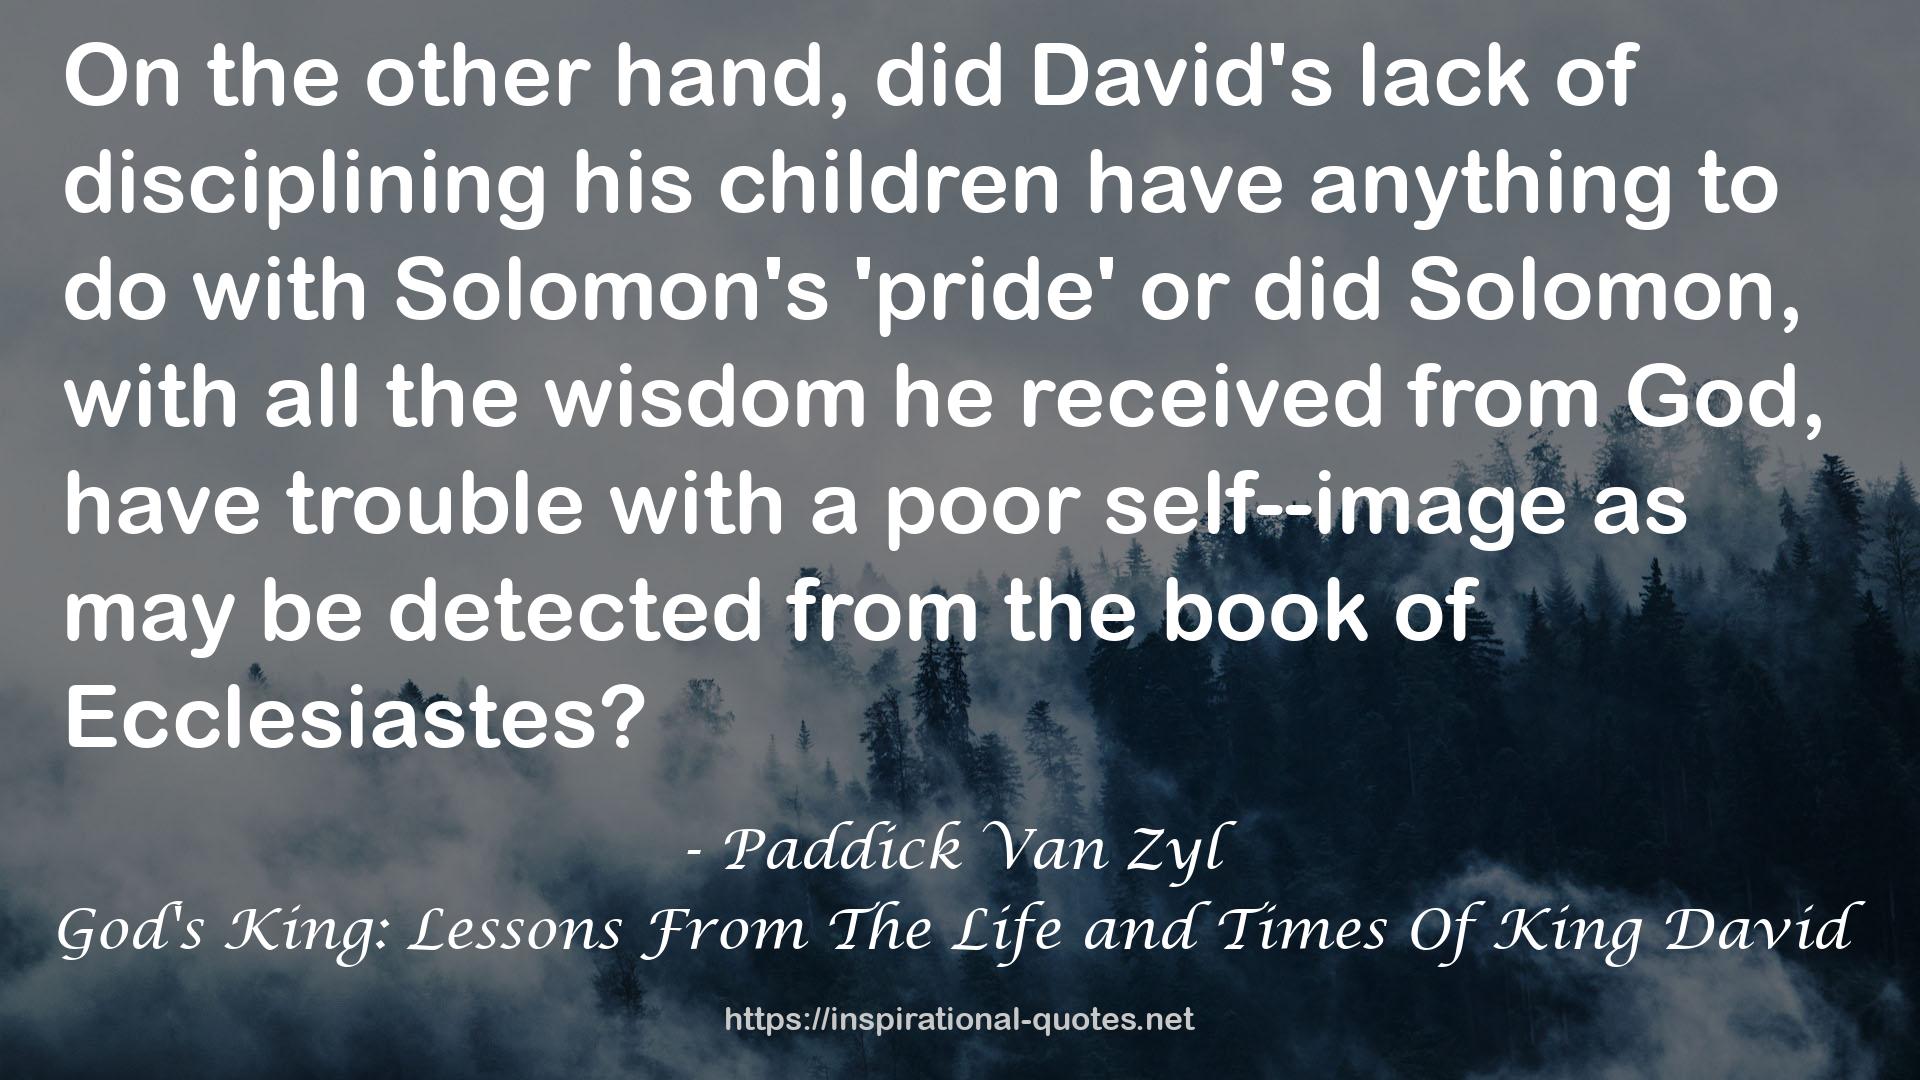 God's King: Lessons From The Life and Times Of King David QUOTES